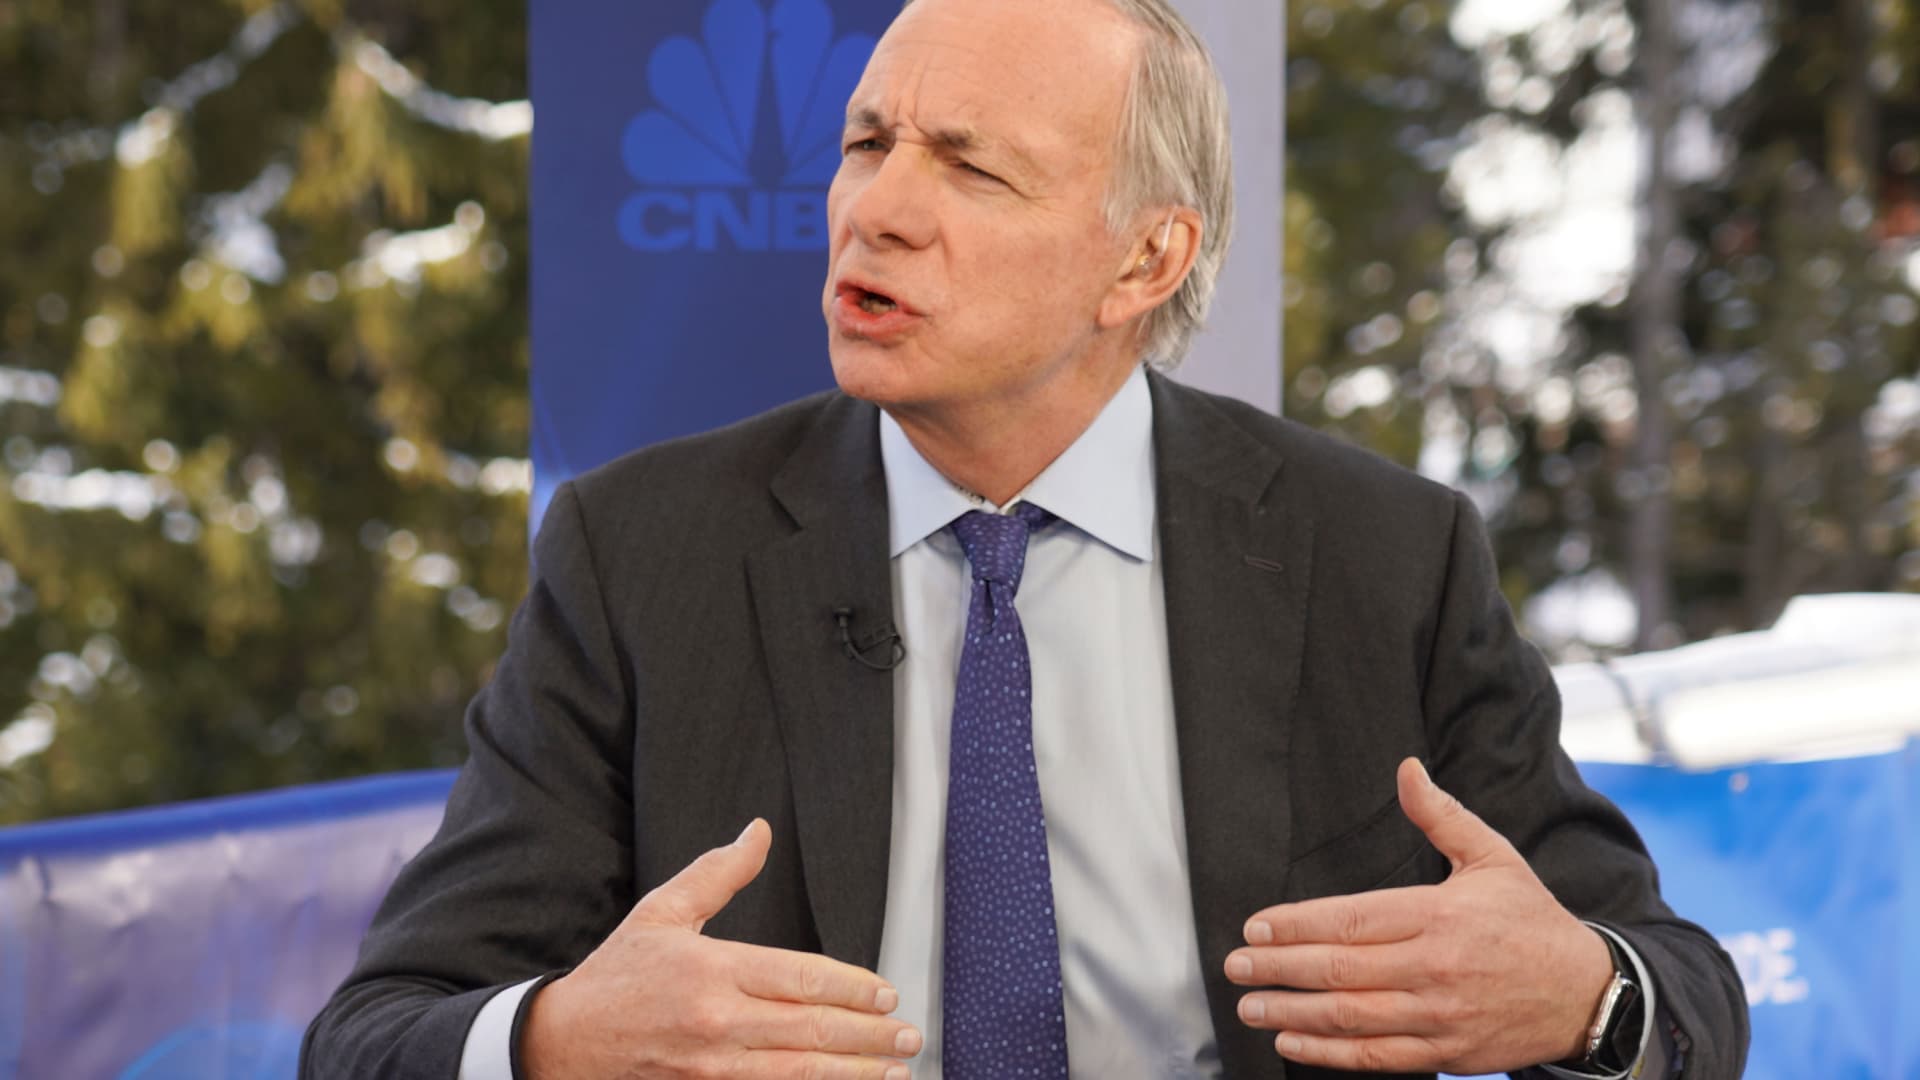 Ray Dalio says cash is still trash, and equities are trashier